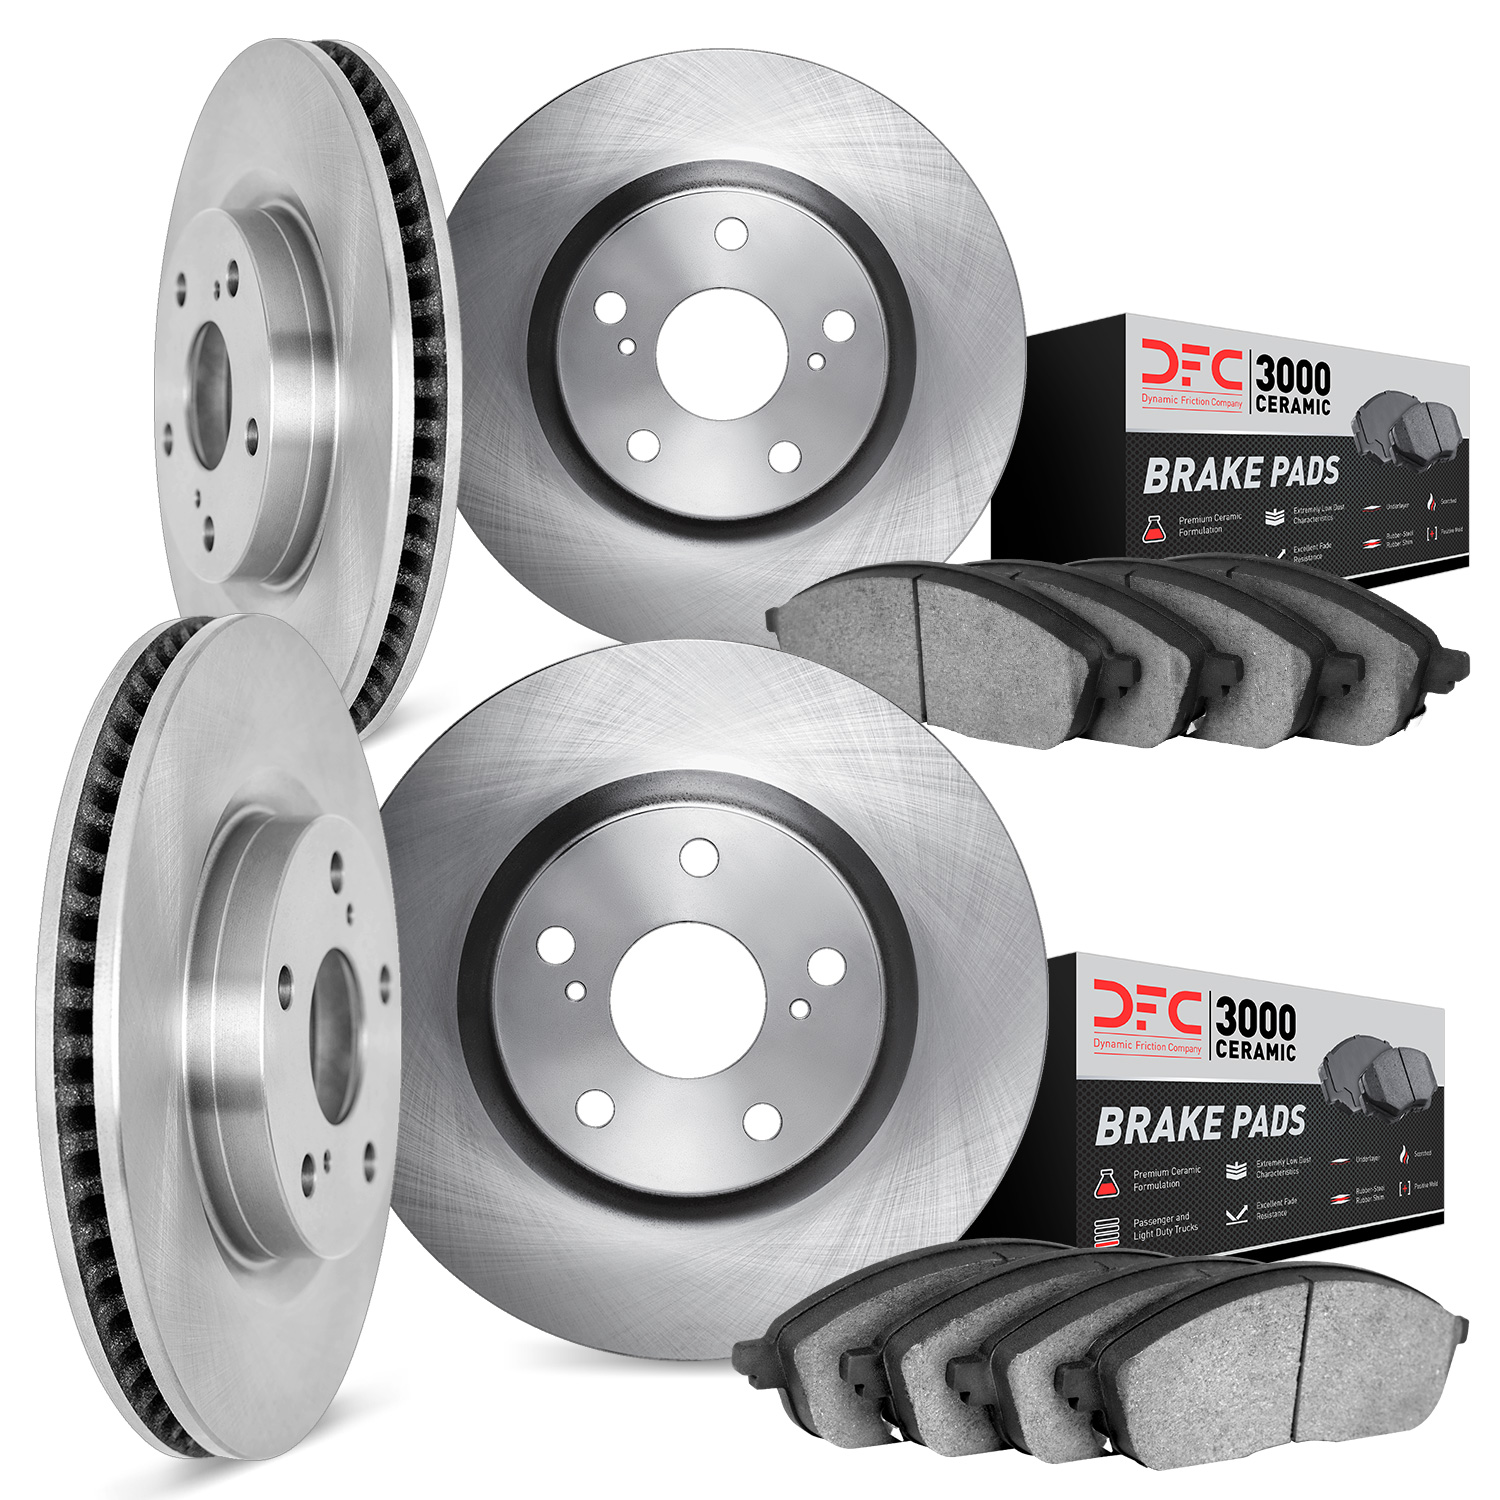 6304-75017 Brake Rotors with 3000-Series Ceramic Brake Pads Kit, 2009-2011 Lexus/Toyota/Scion, Position: Front and Rear